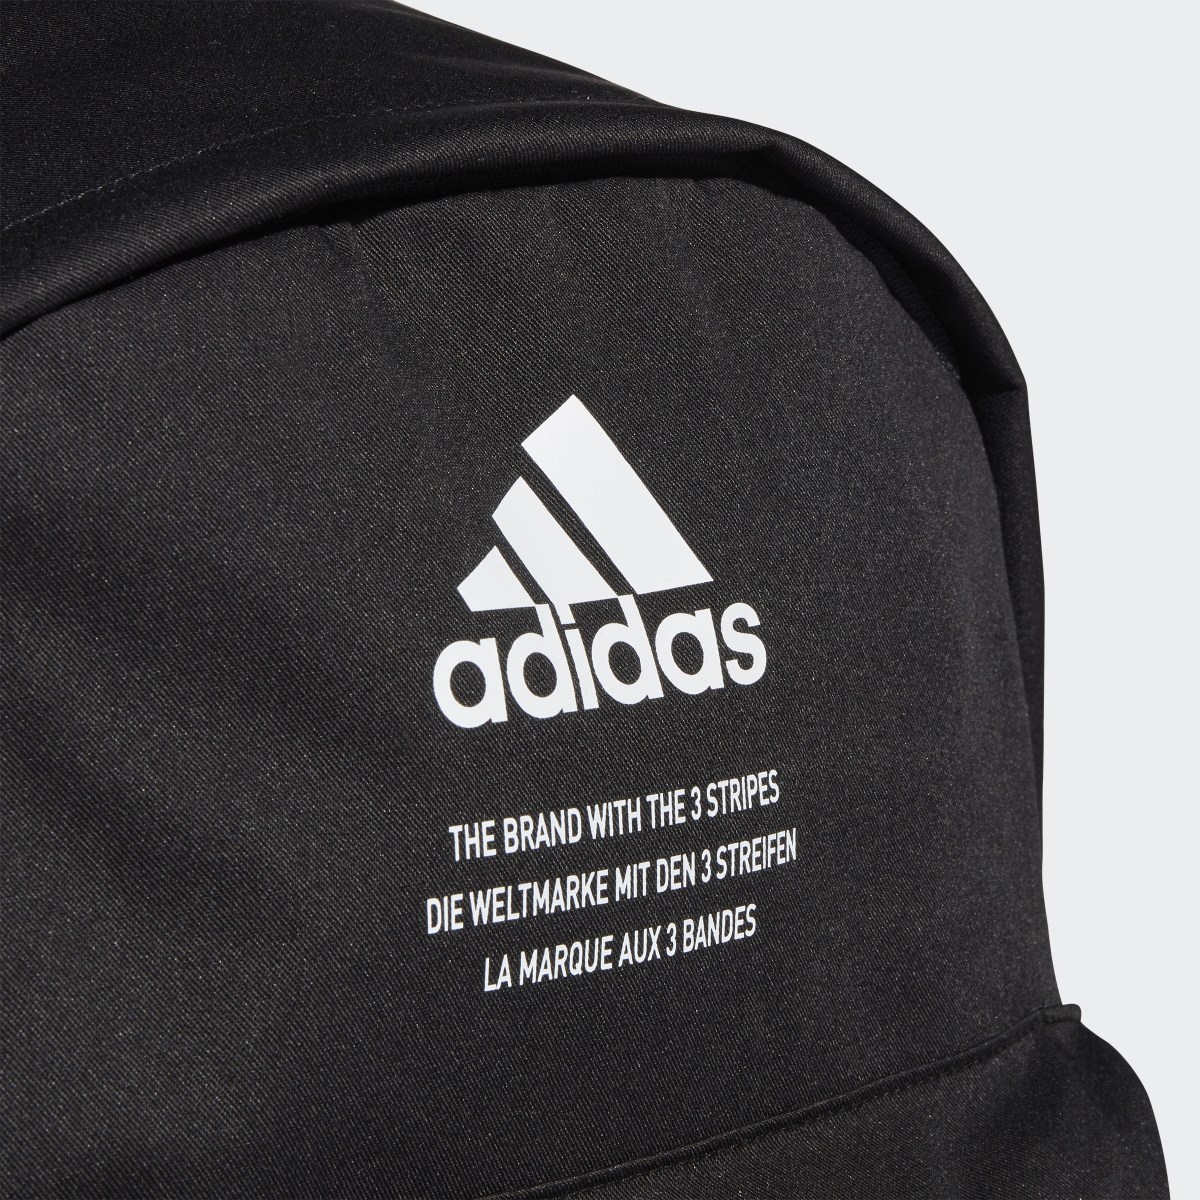 Adidas Classic Fabric Backpack. 6